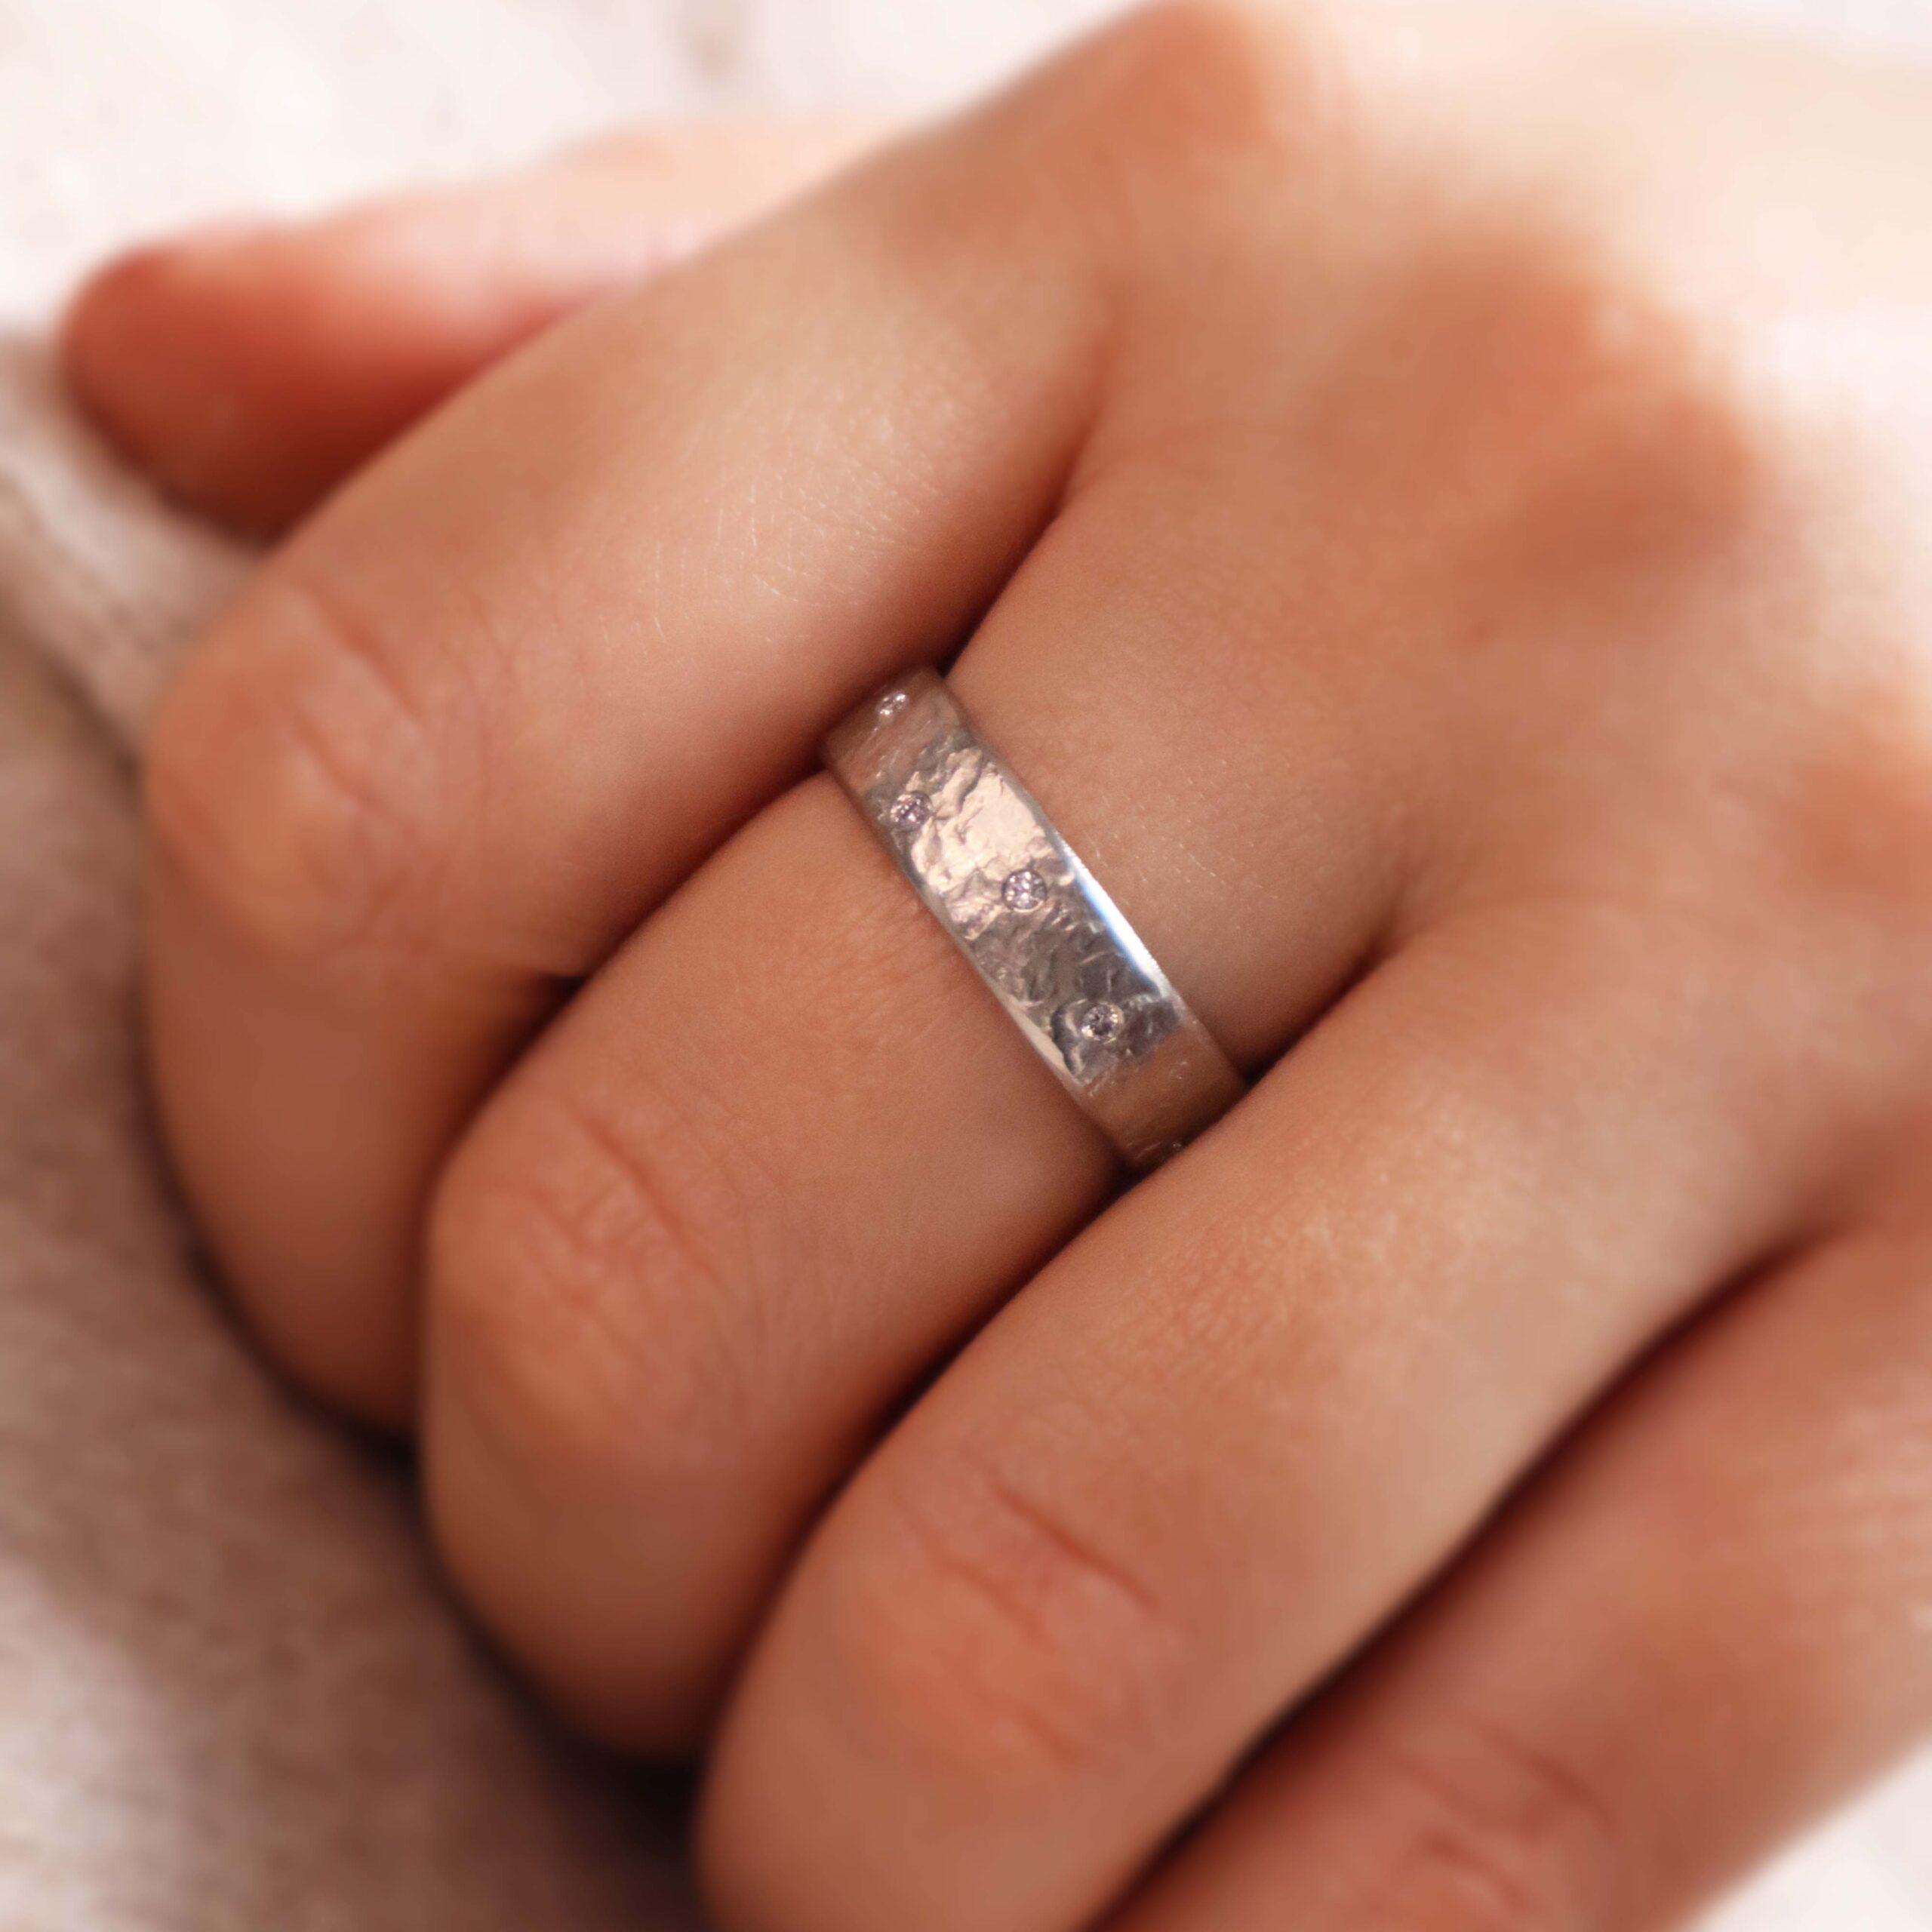 Hammered platinum ring with pale pink diamonds